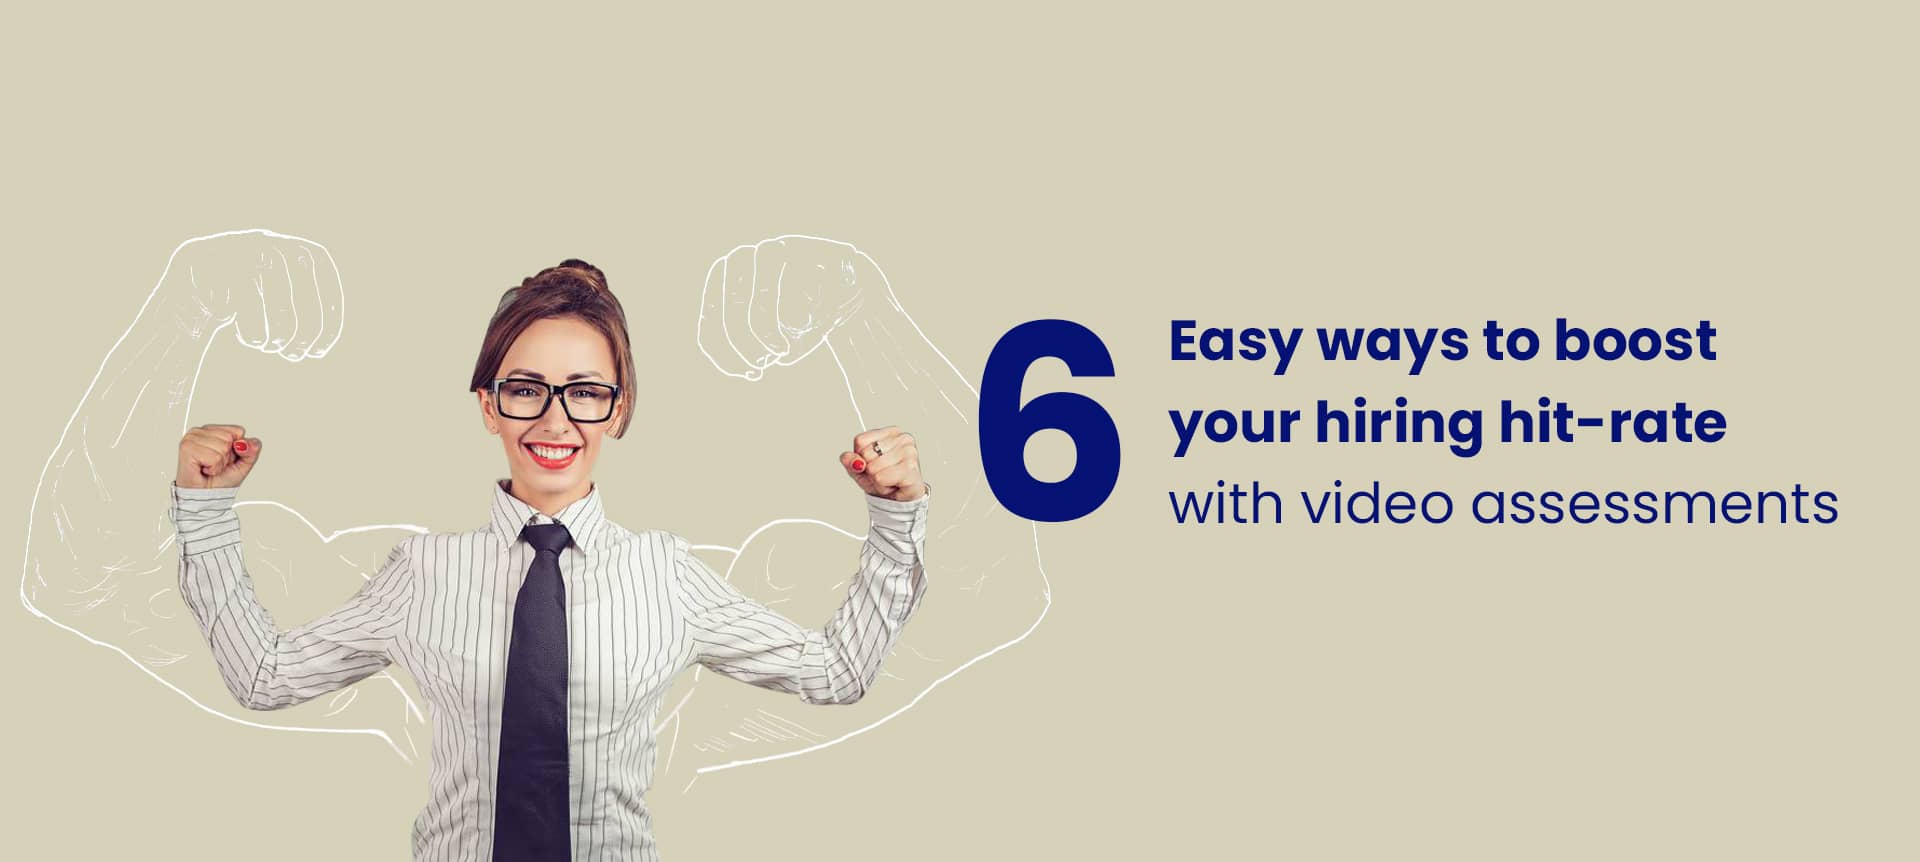 A female recruiter wearing a tie, glasses, and lifting her arms up, ready to boost the hiring hit-rate for video assessments. 